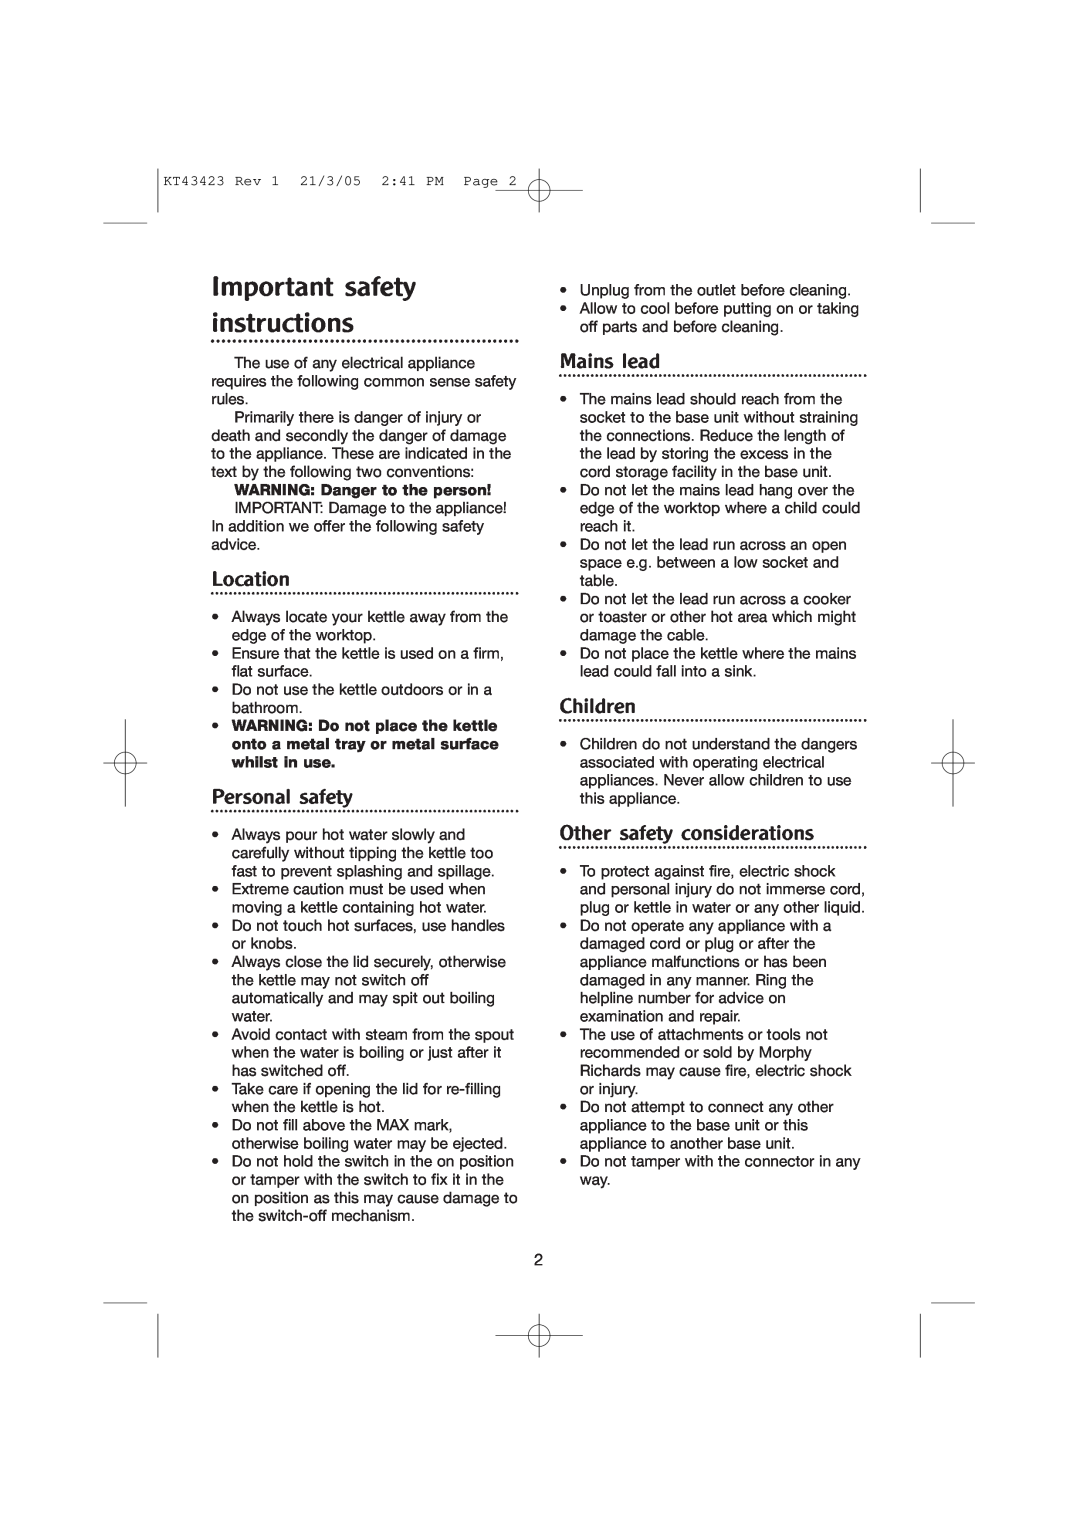 Morphy Richards Kettle manual Important safety instructions, Location, Personal safety, Mains lead, Children 